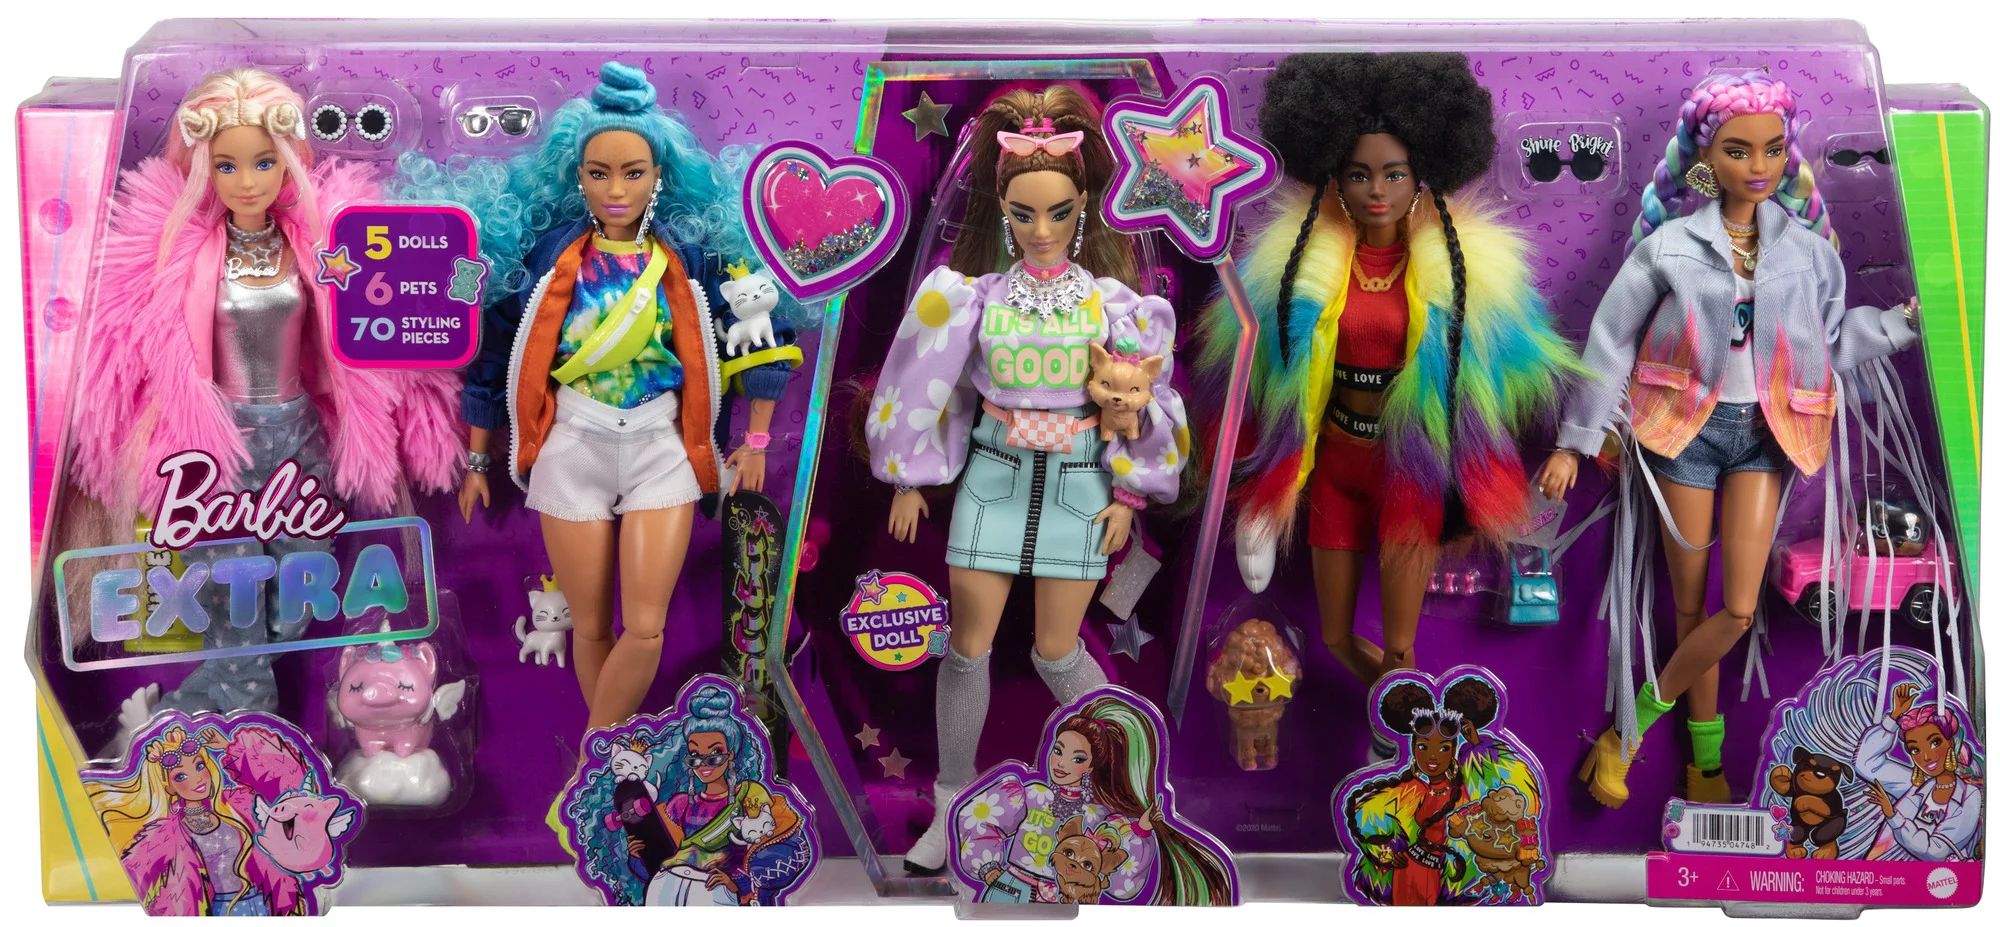 Barbie Extra 5-Doll Set with 6 Pets & 70 Styling Pieces for Kids 3 Years Old & Up | Walmart (US)